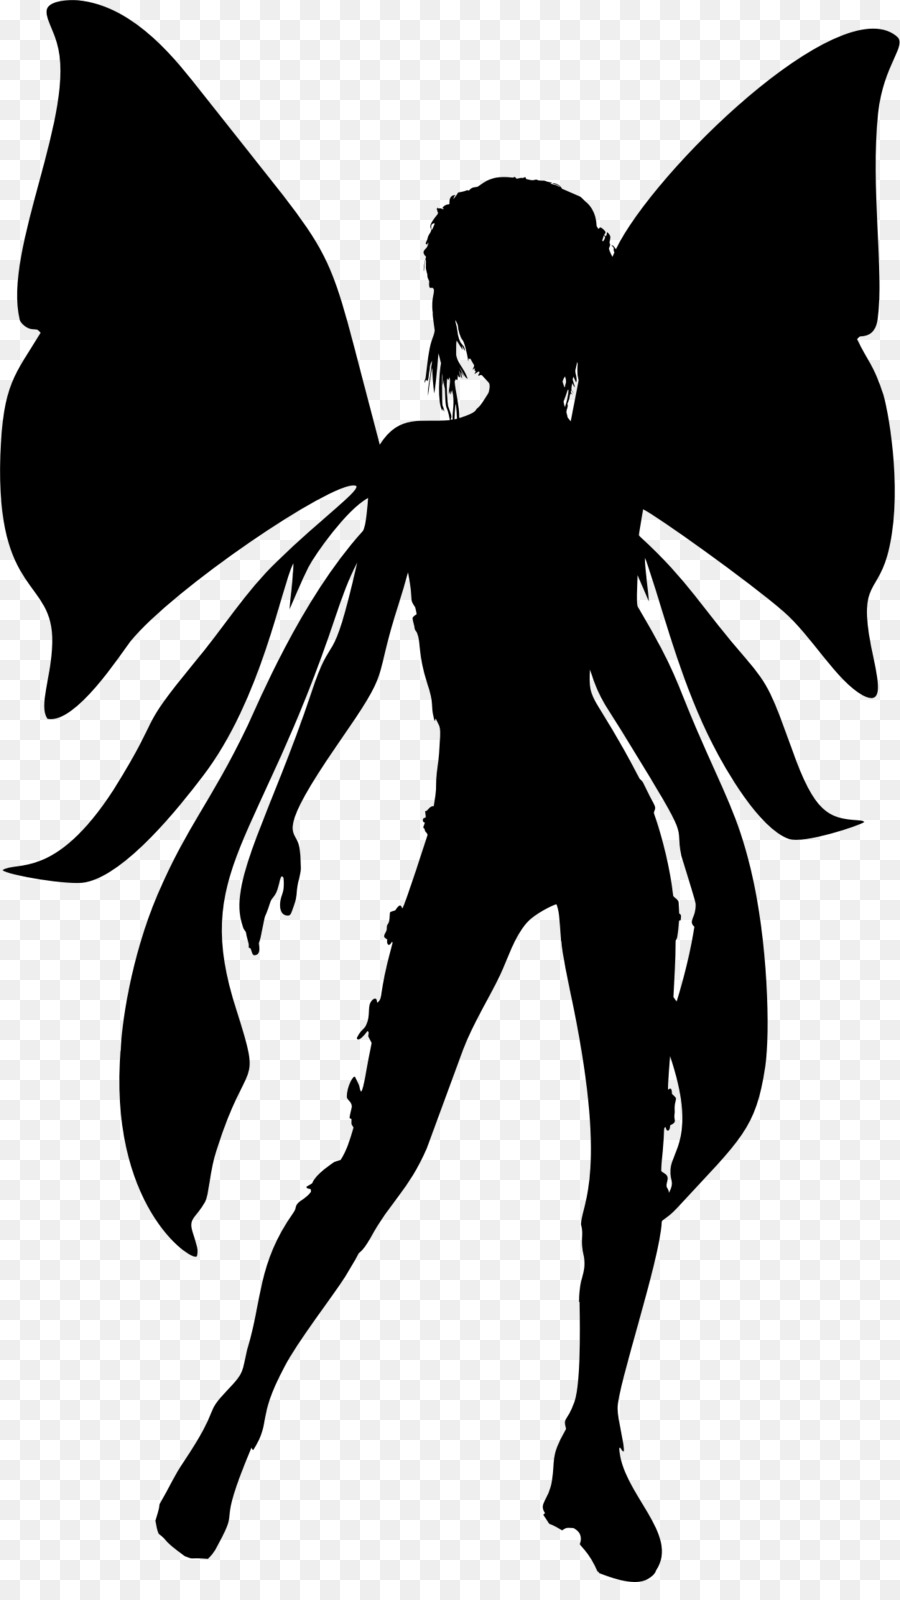 Fairy Silhouette Clip art - wings png download - 1253*2202 - Free Transparent Fairy png Download.